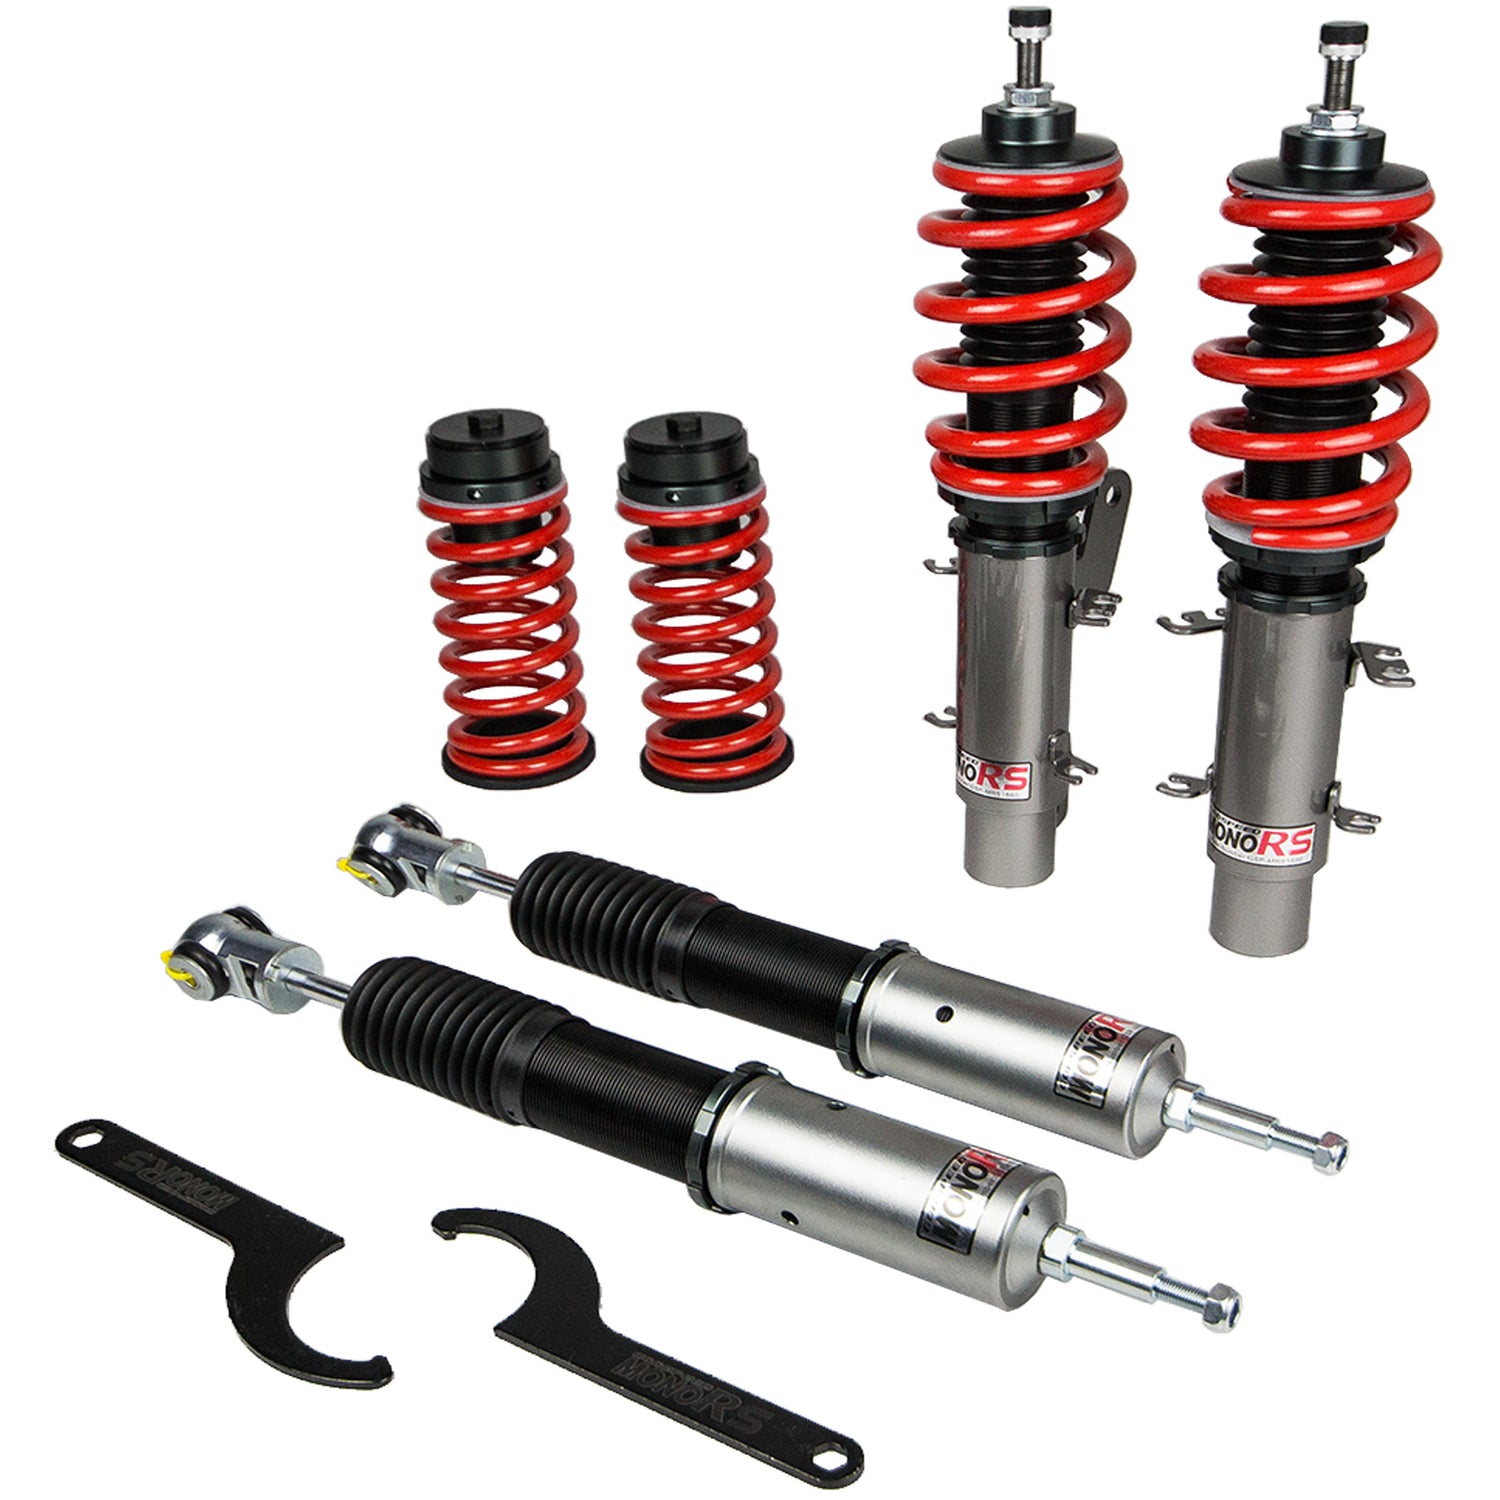 Godspeed MRS1860-B MonoRS Coilover Lowering Kit, 32 Damping Adjustment, Ride Height Adjustable